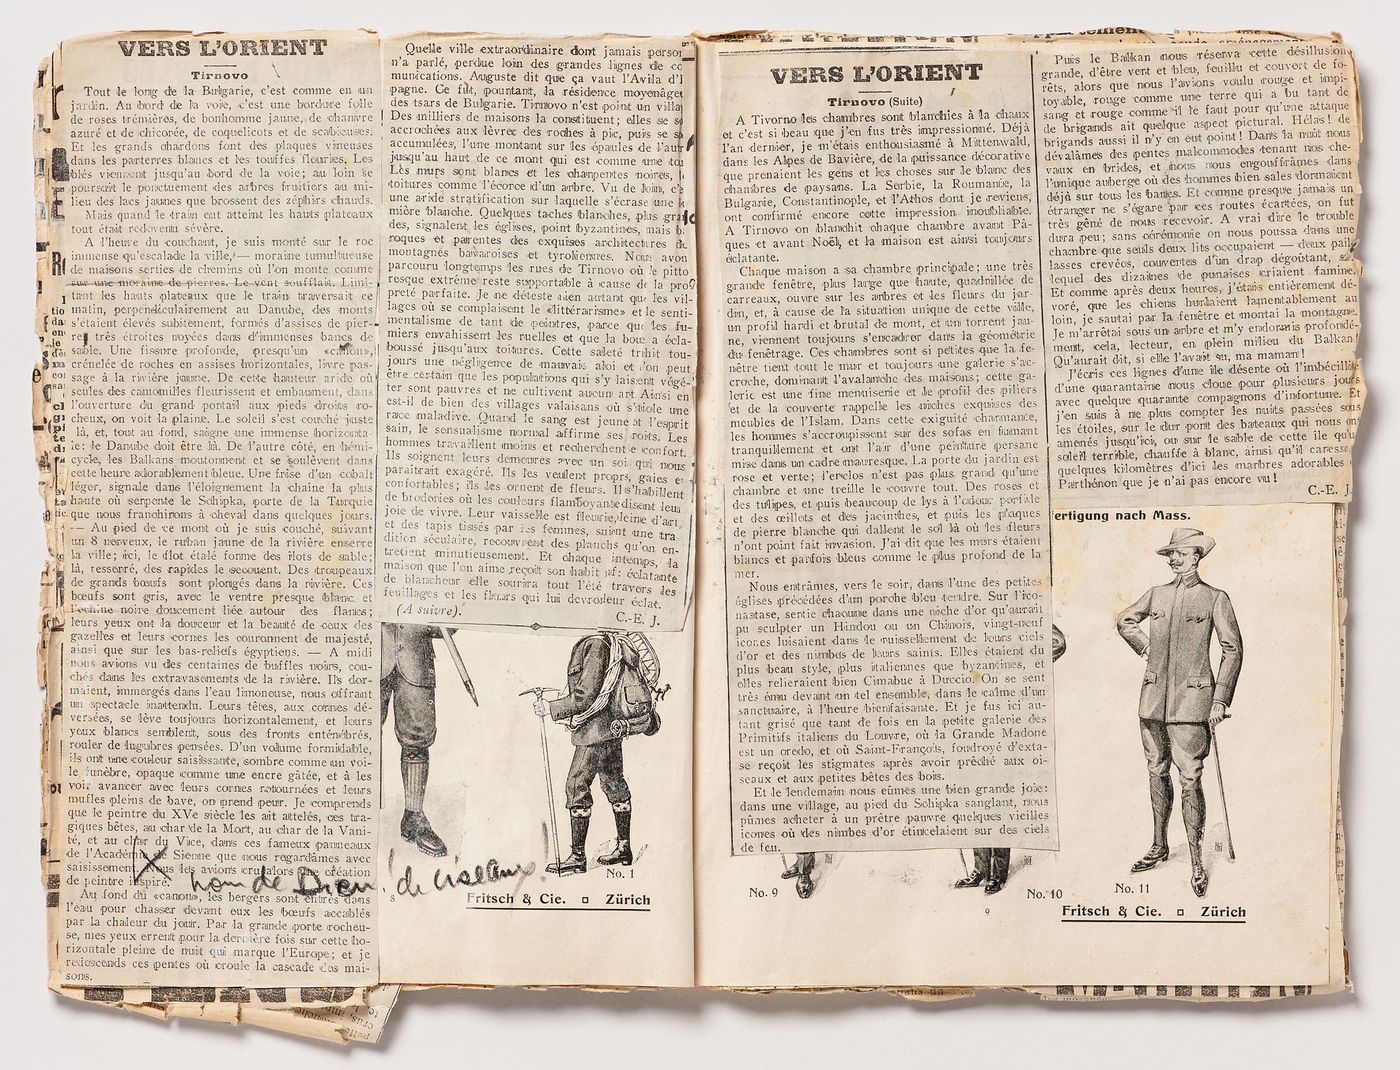 Pages from a maquette containing a collection of published newspaper articles written by Charles-Édouard Jeanneret during a voyage to the Orient